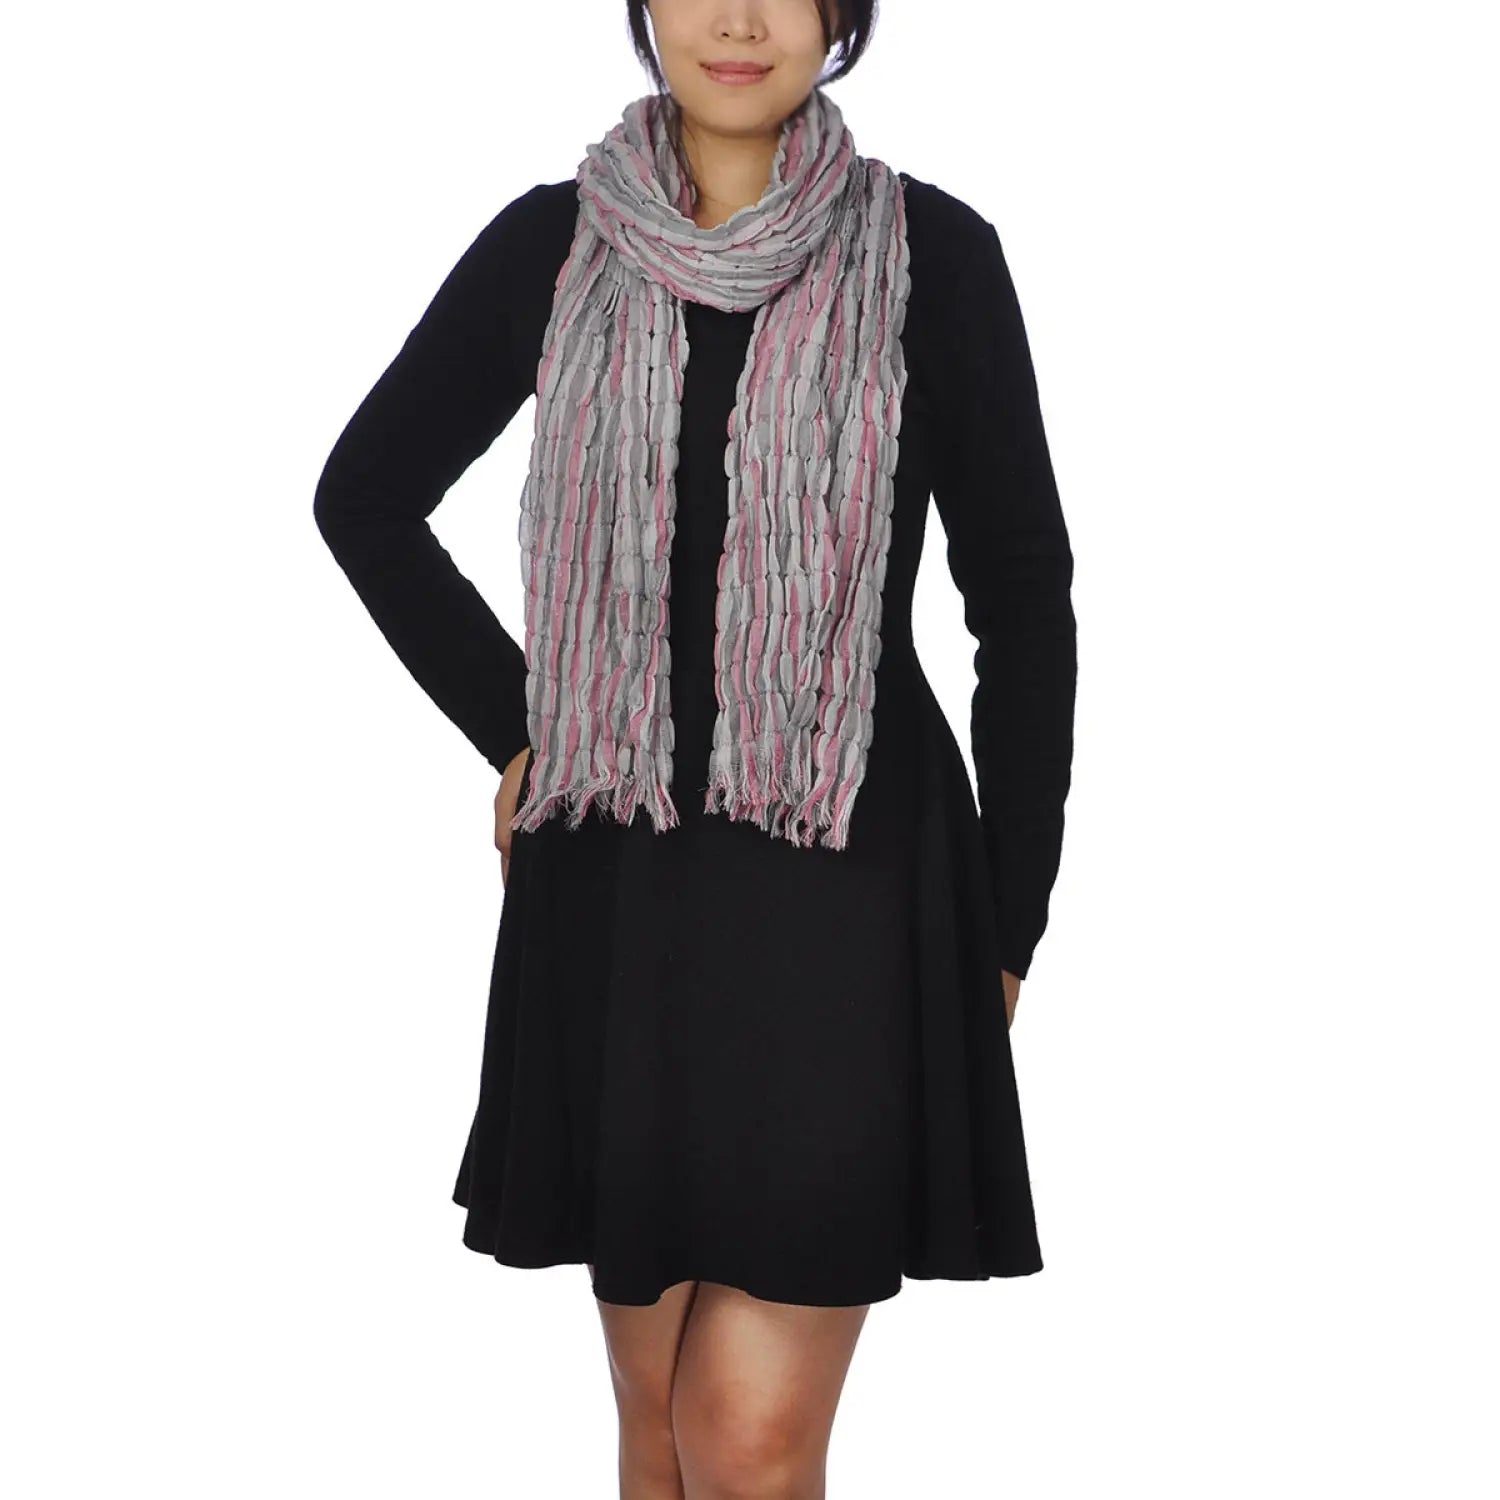 Woman wearing textured check print scarf and black dress.